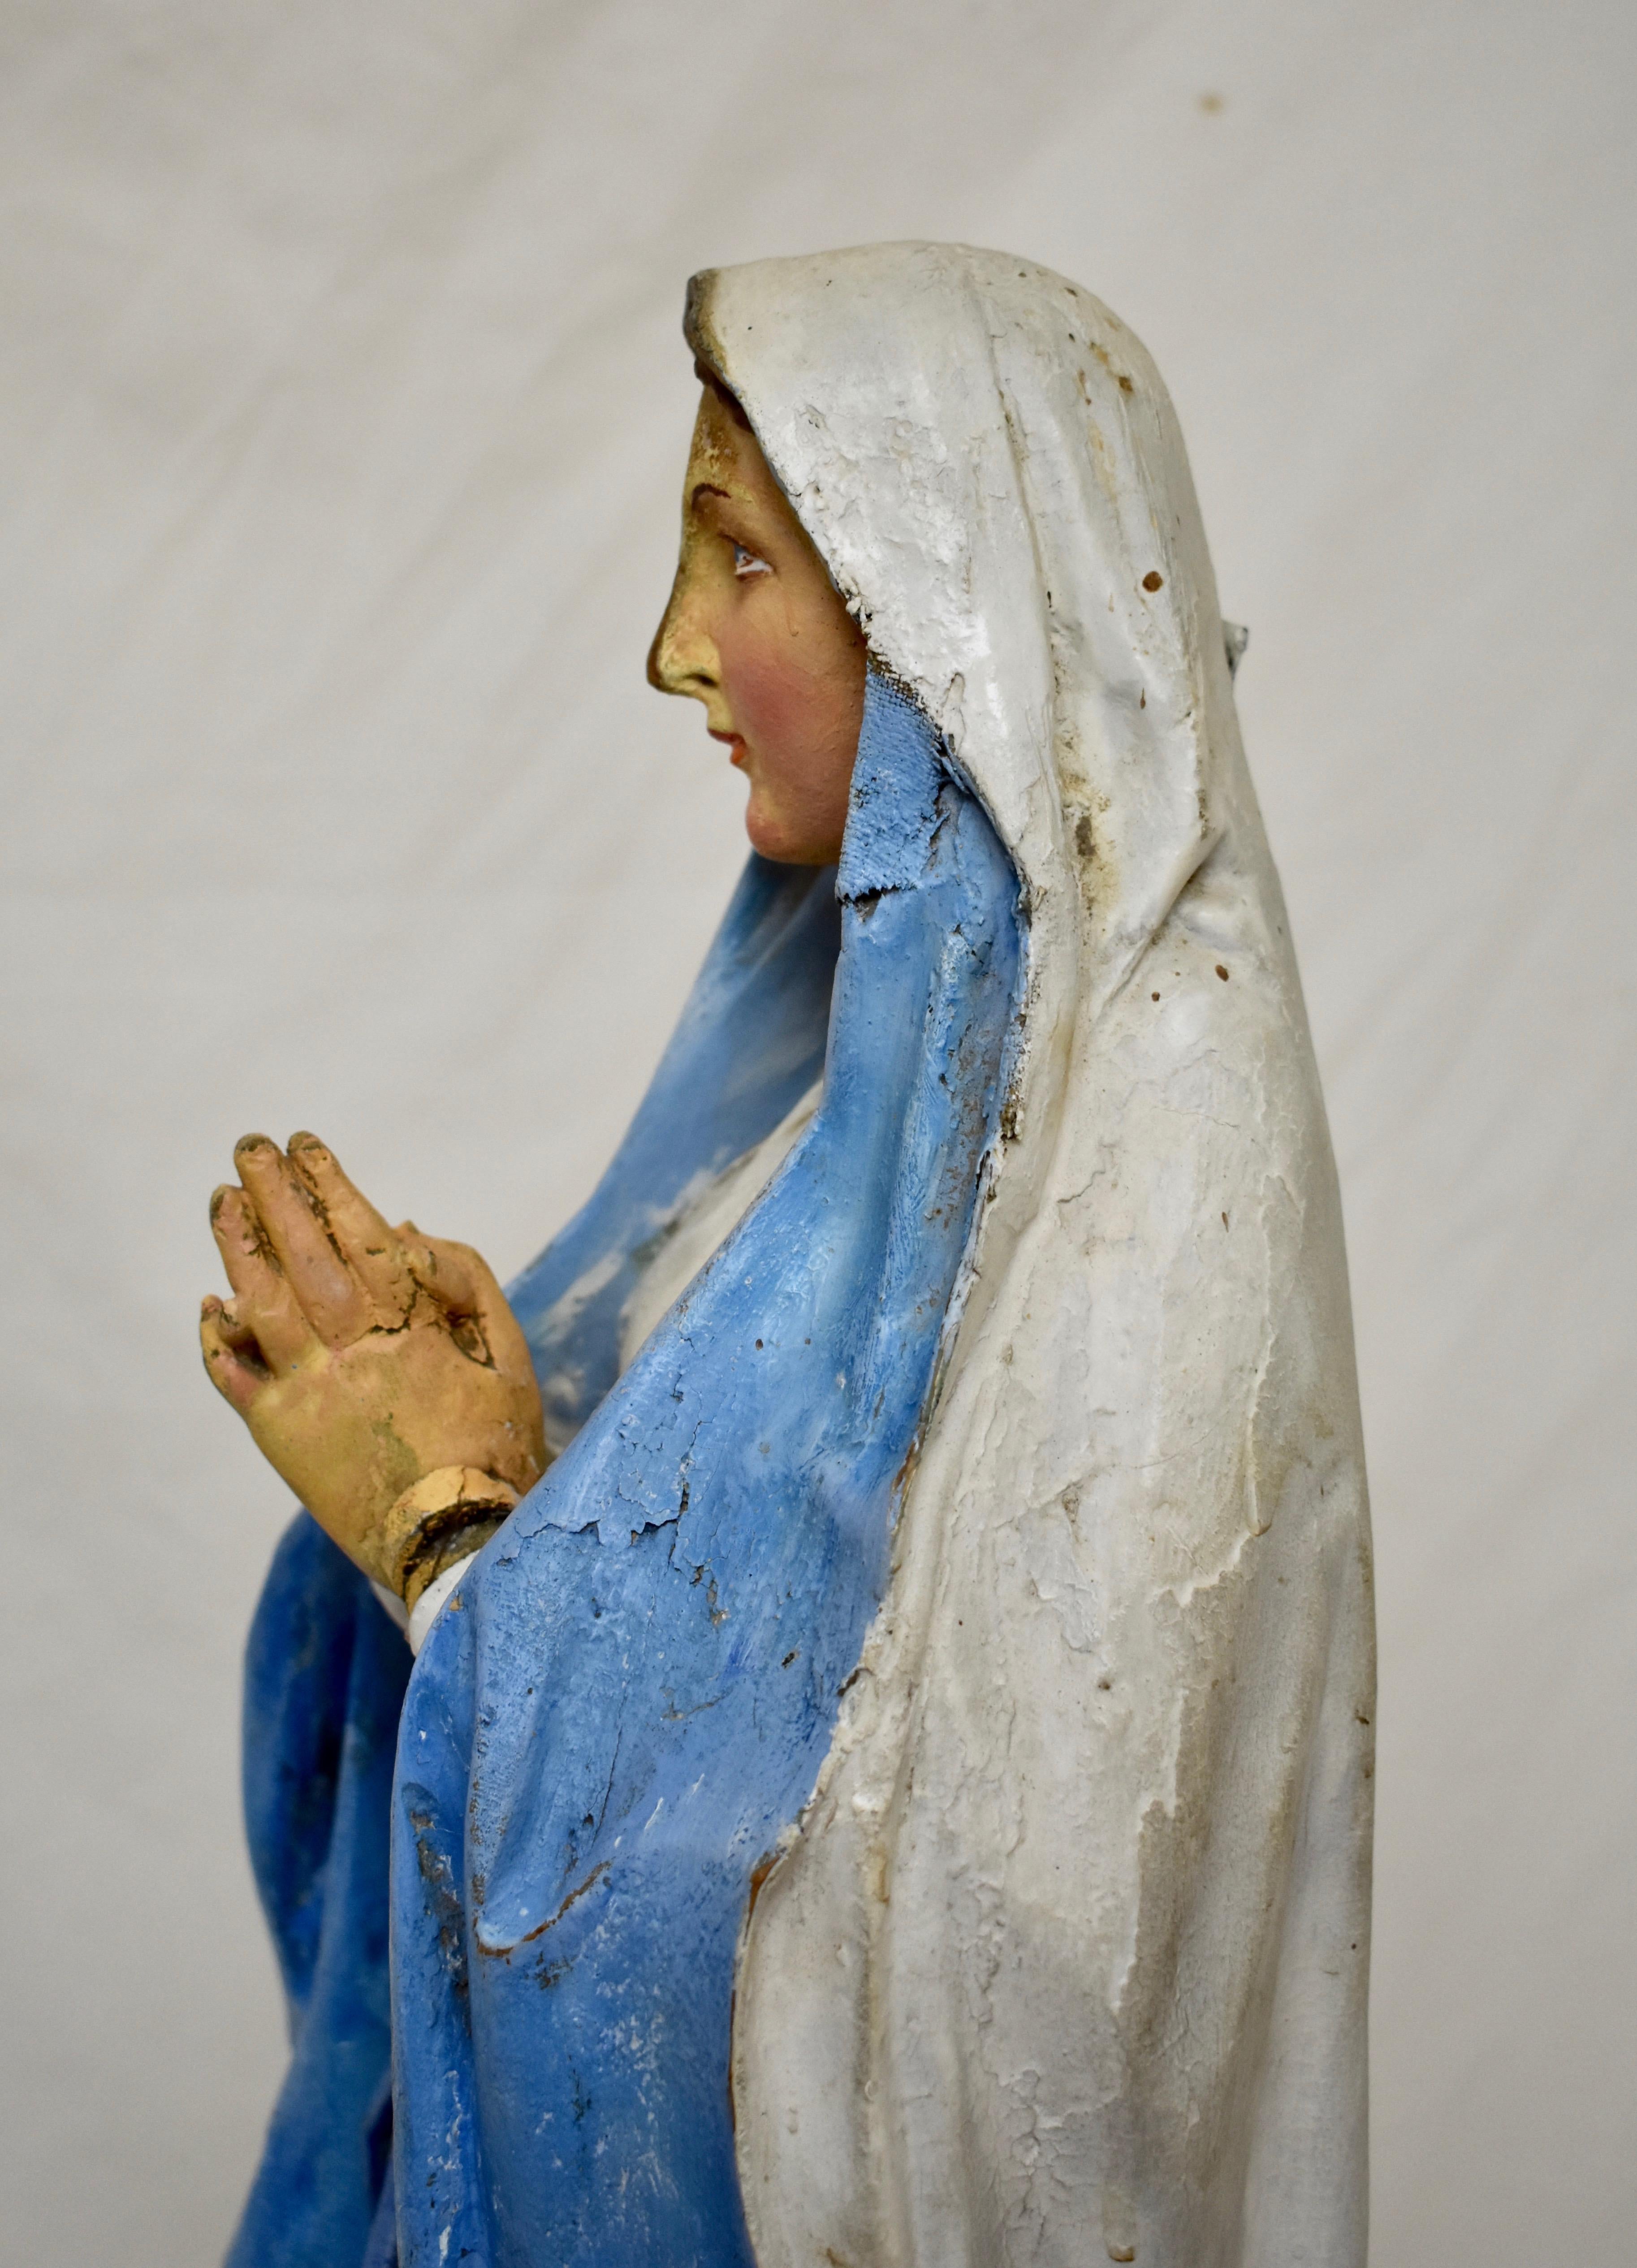 19th Century Hand Carved Wooden Sculpture of Our Lady of Lourdes